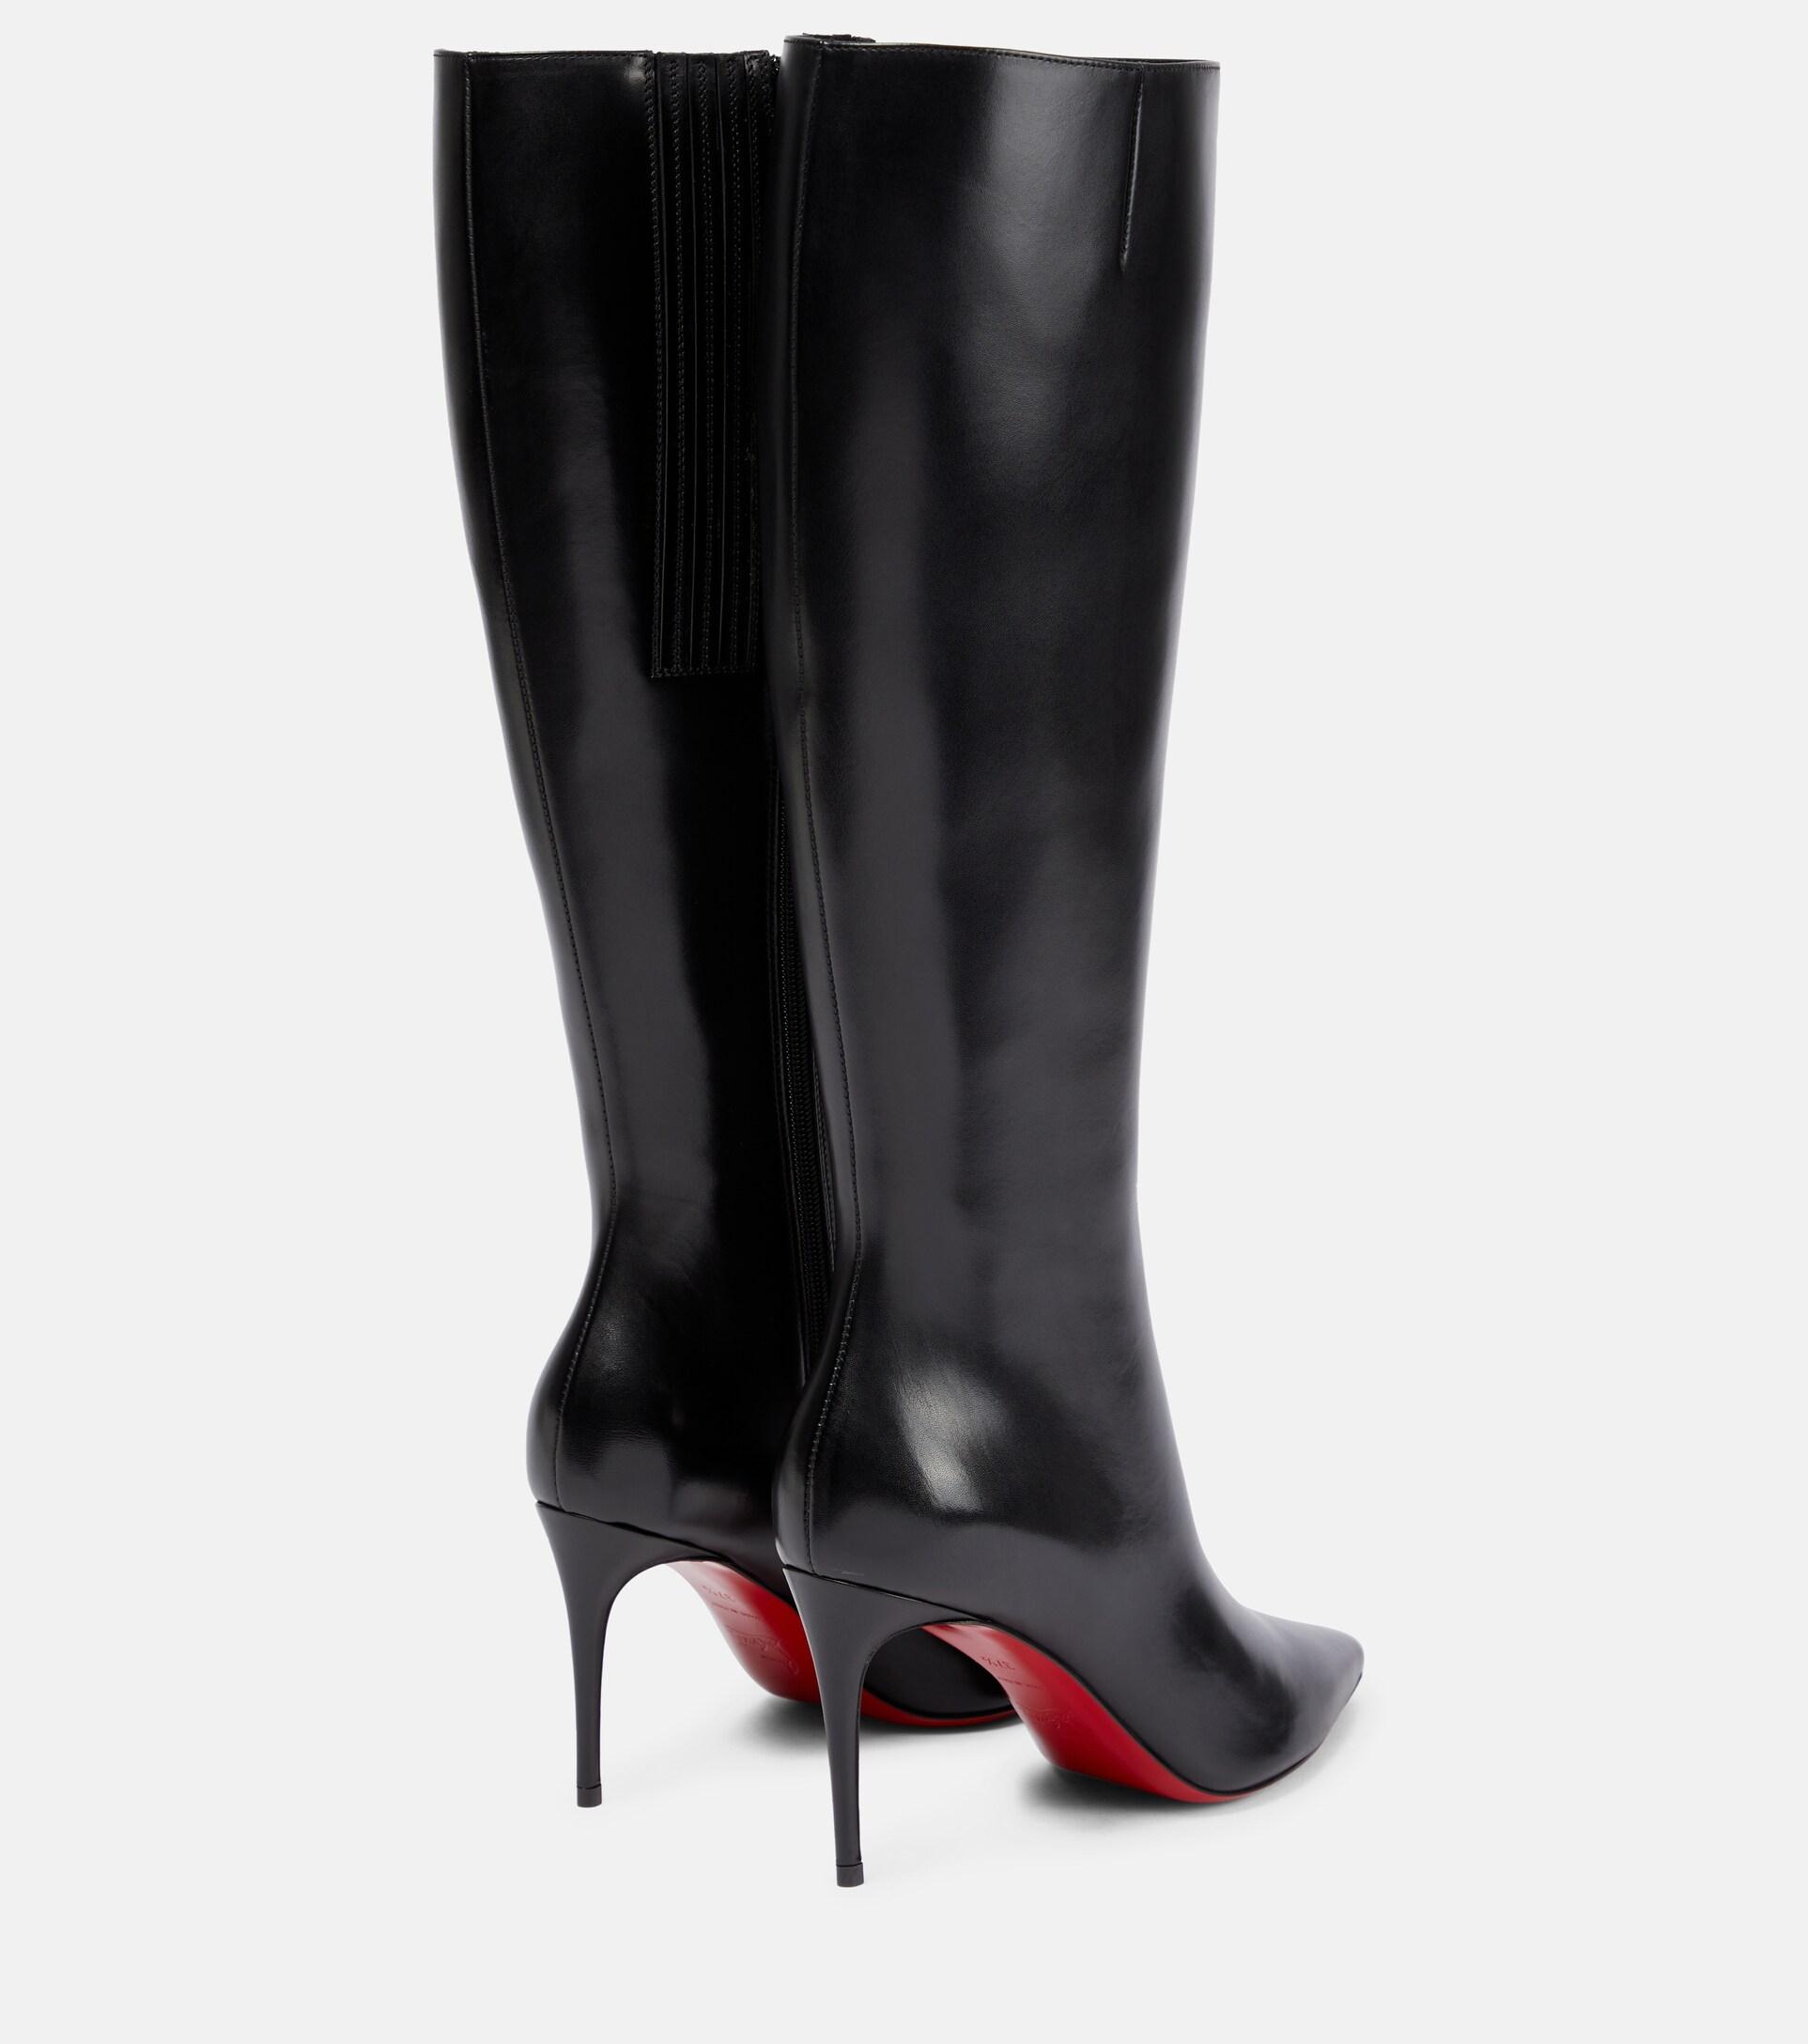 Christian Louboutin Kate Botta 85 Leather Knee-high Boots in Black | Lyst